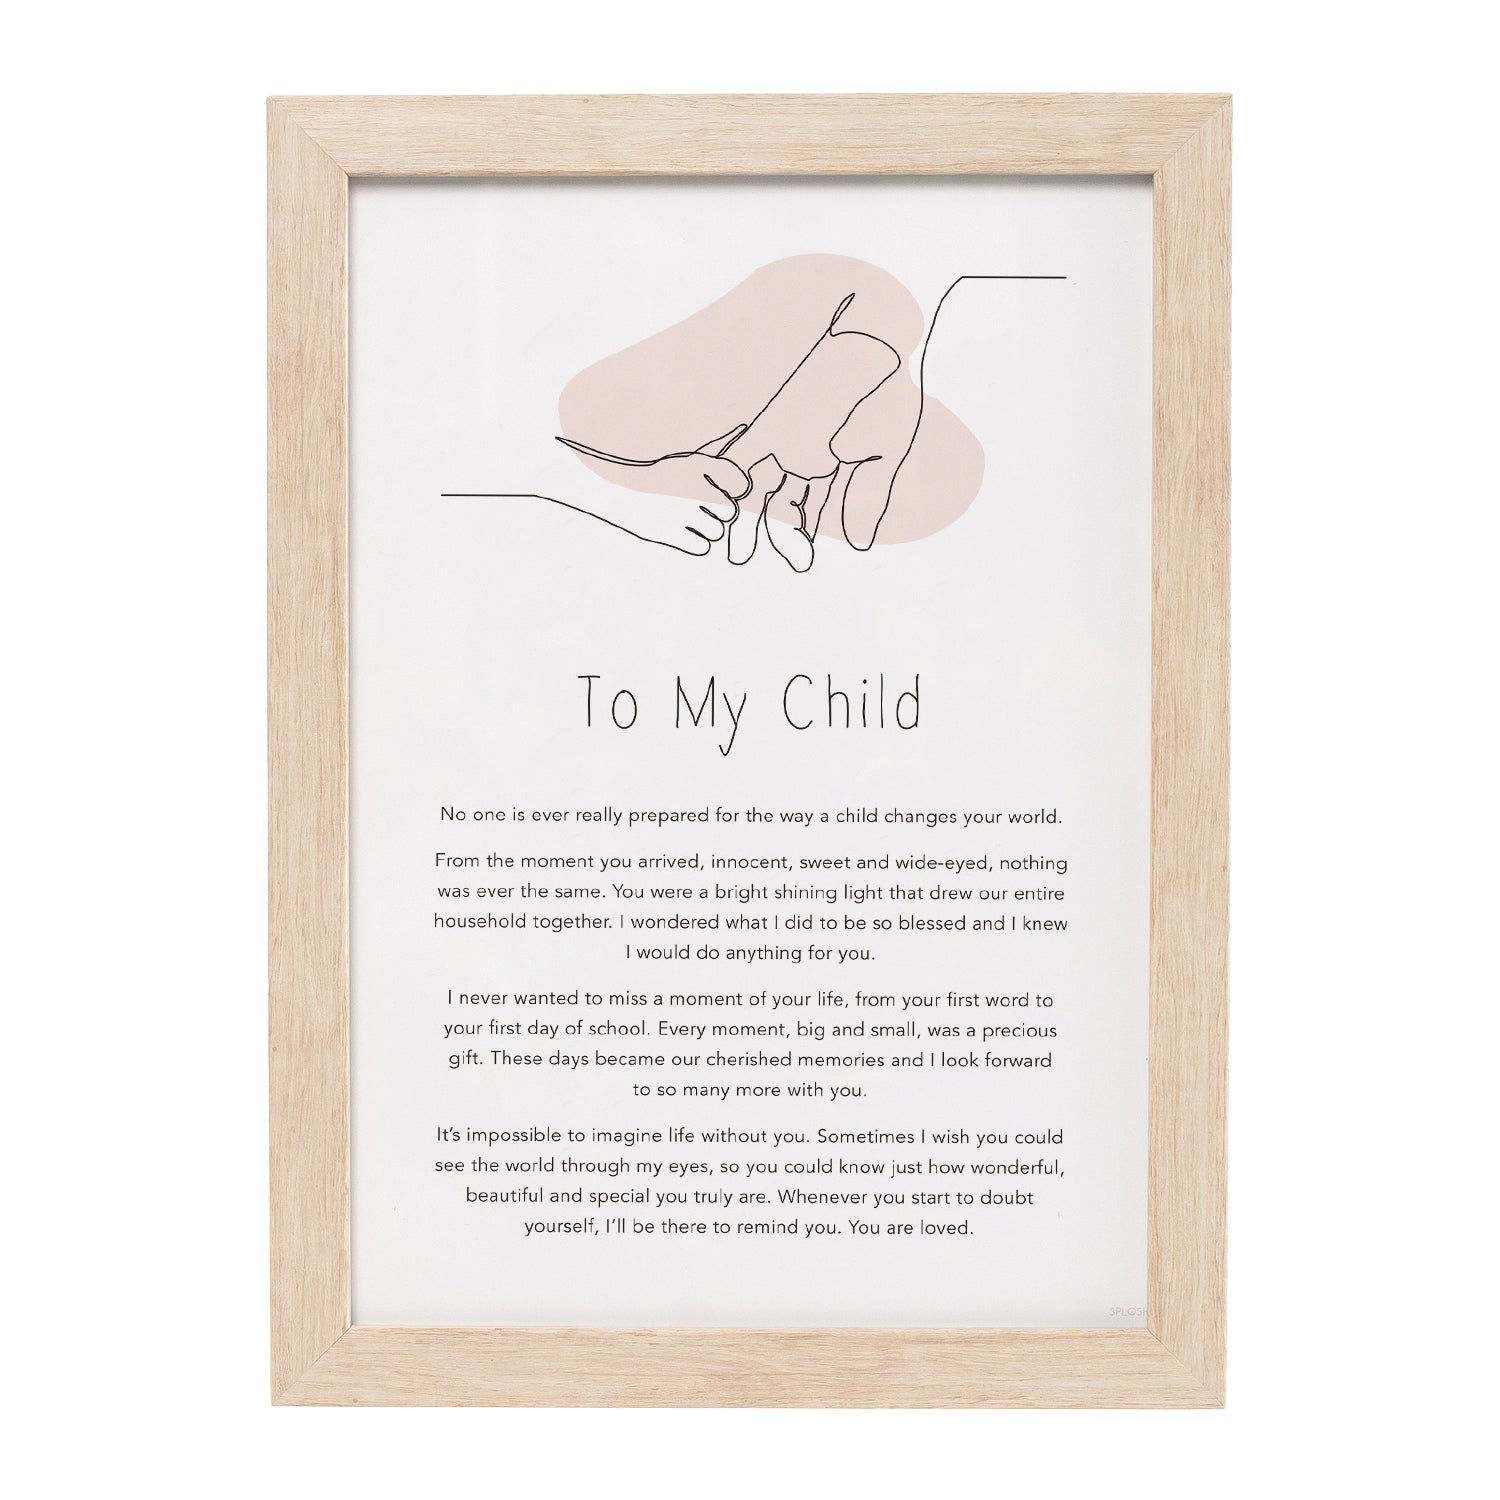 Gift Of Words Frame - To My Child